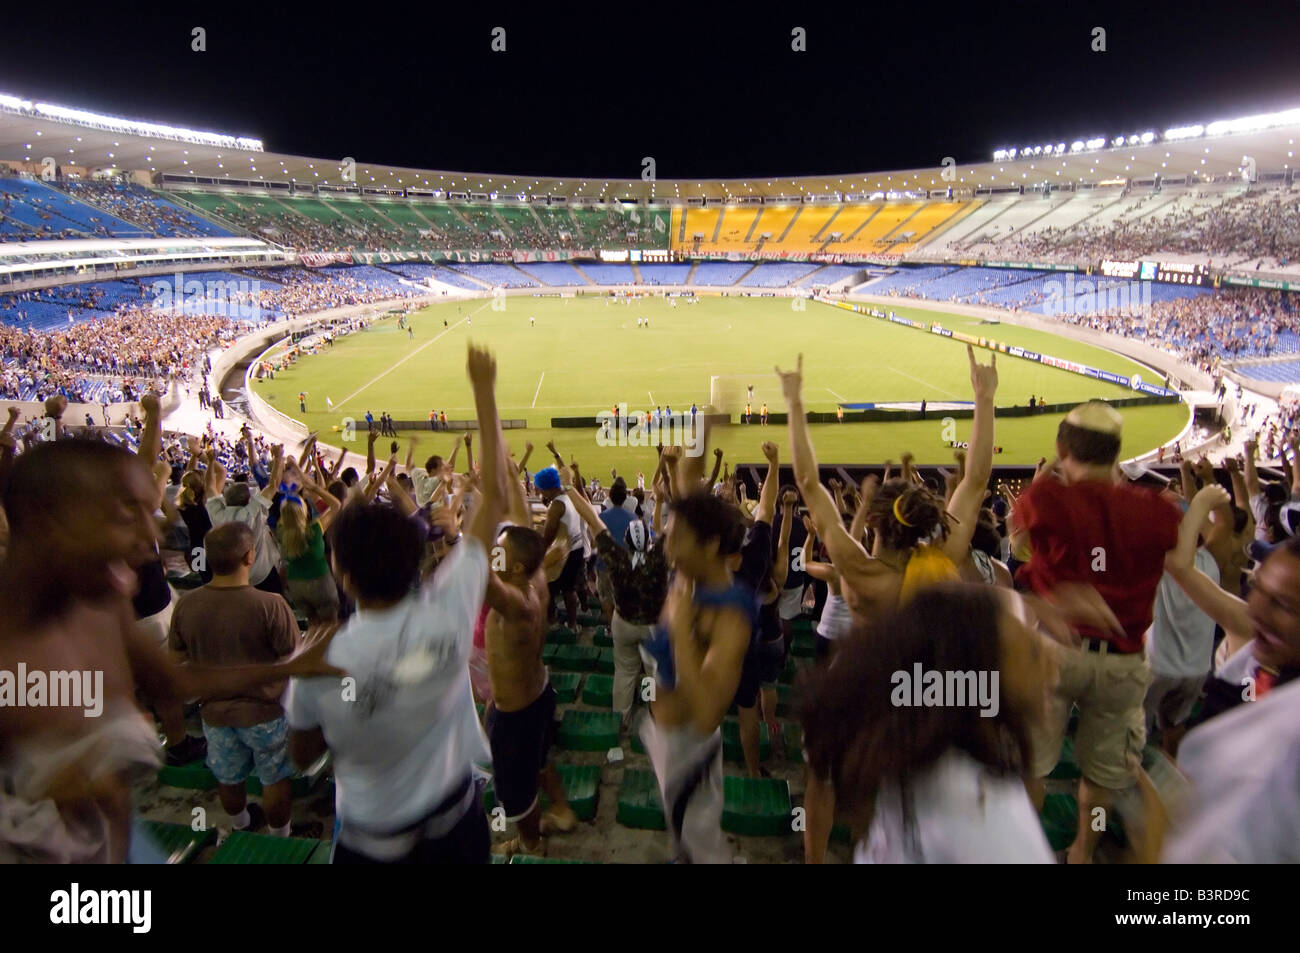 Local Brazilians cheer as a goal is scored at a football match at the Maracana stadium in Rio between Vasco and Fluminense. Stock Photo